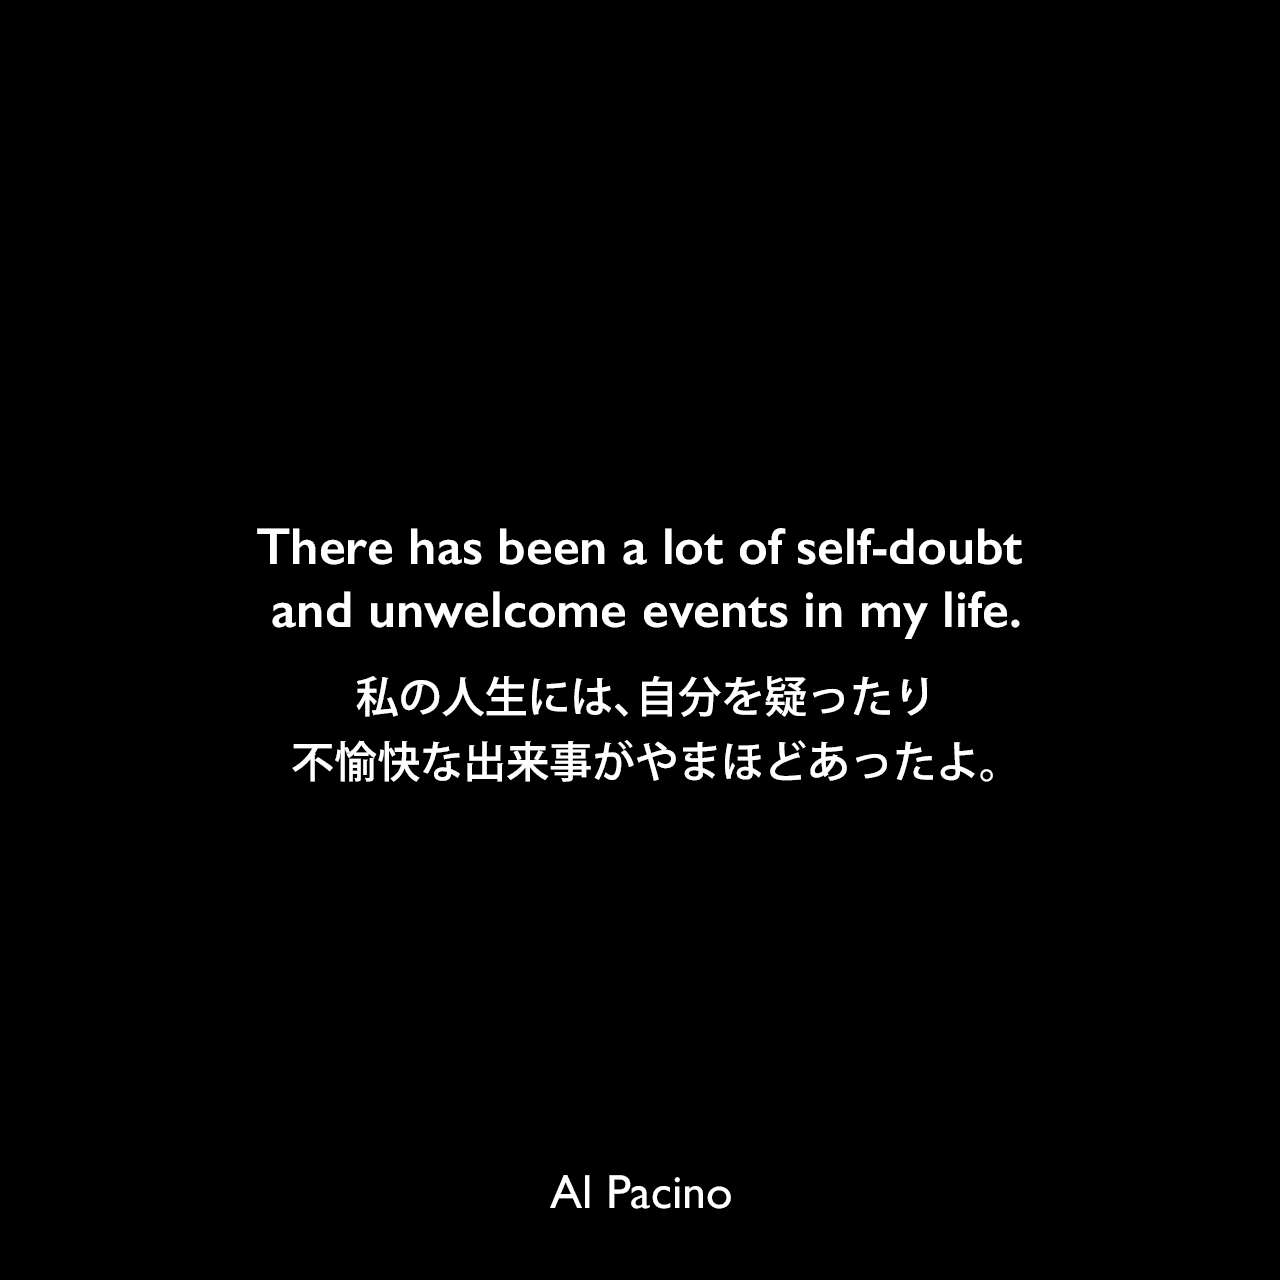 There has been a lot of self-doubt and unwelcome events in my life.私の人生には、自分を疑ったり不愉快な出来事がやまほどあったよ。Al Pacino